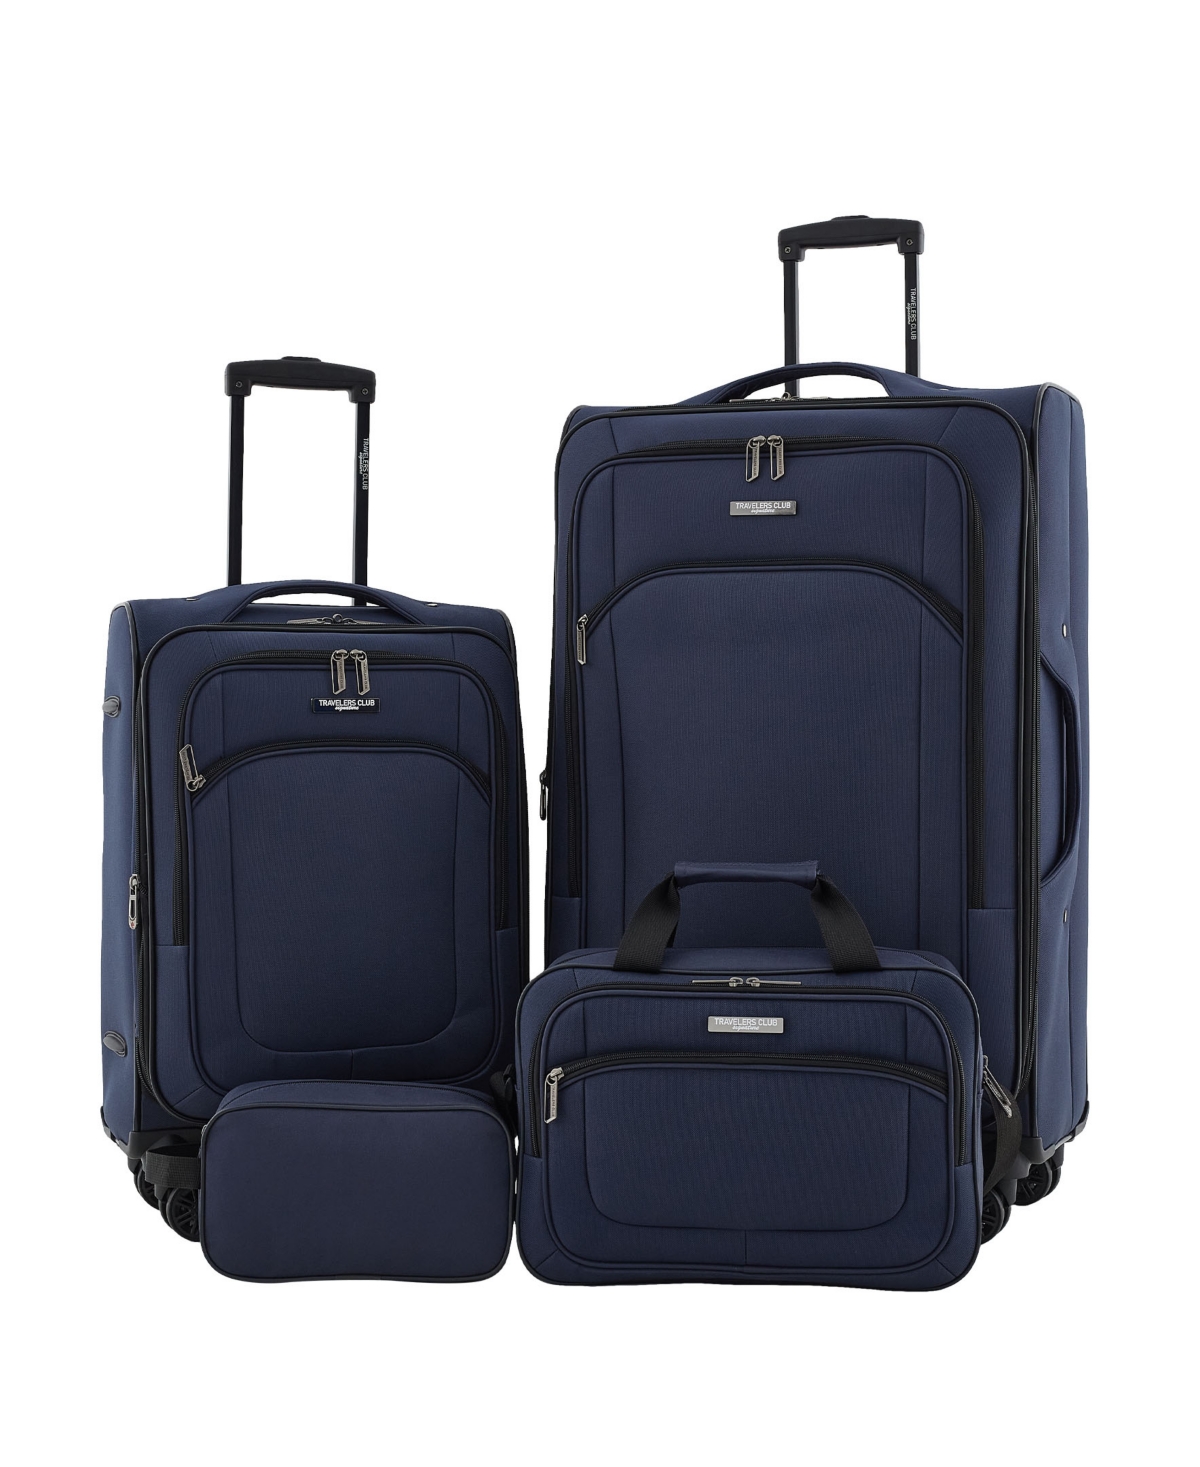 4 Piece Expandable Rolling Luggage Collection - Gray